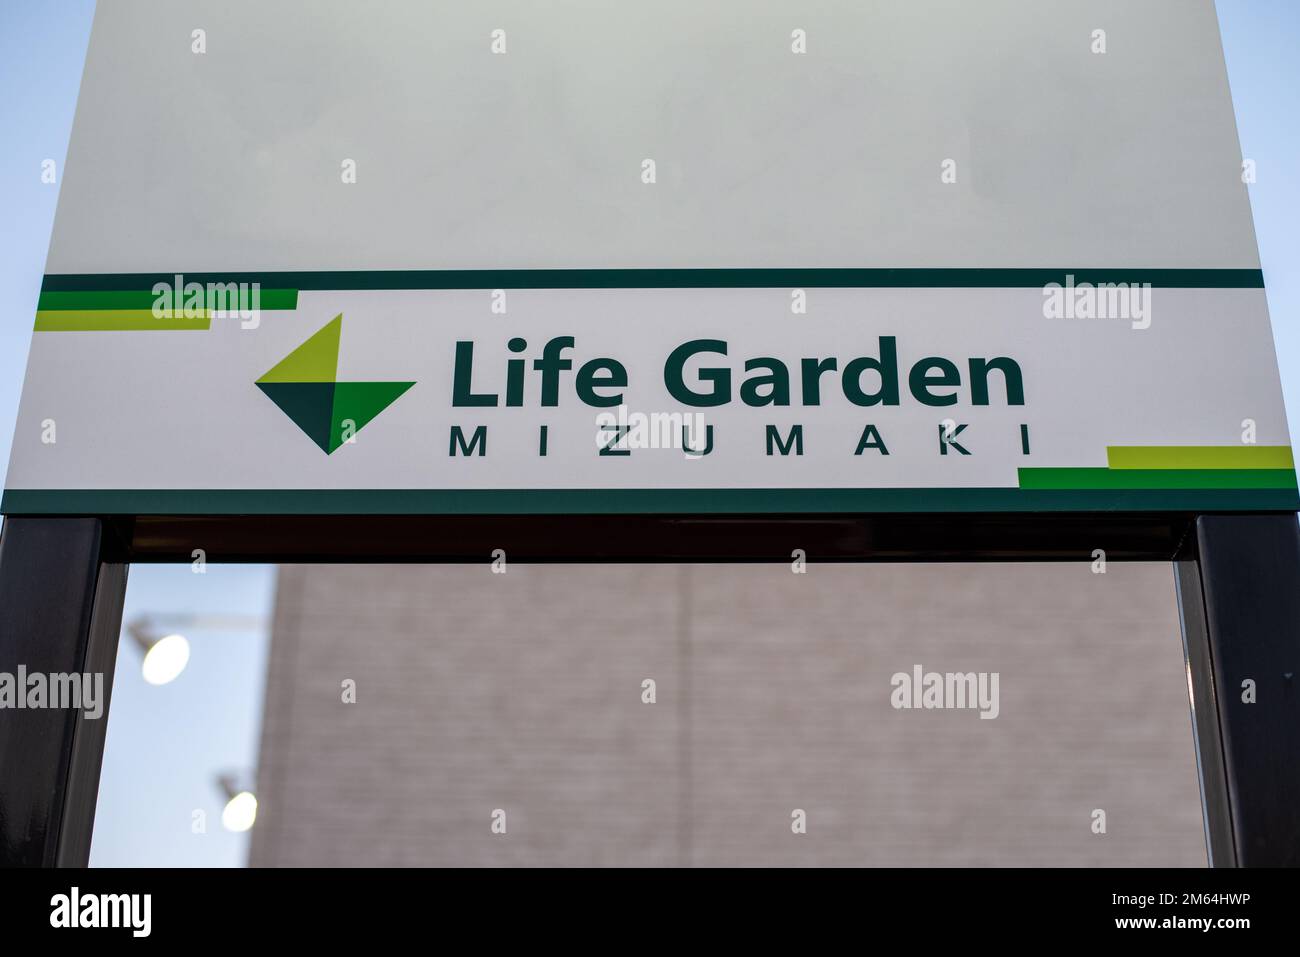 Life Garden is shopping compound in Mizumaki Town, Fukuoka with stores, a gym, restaurants and groceries. Stock Photo